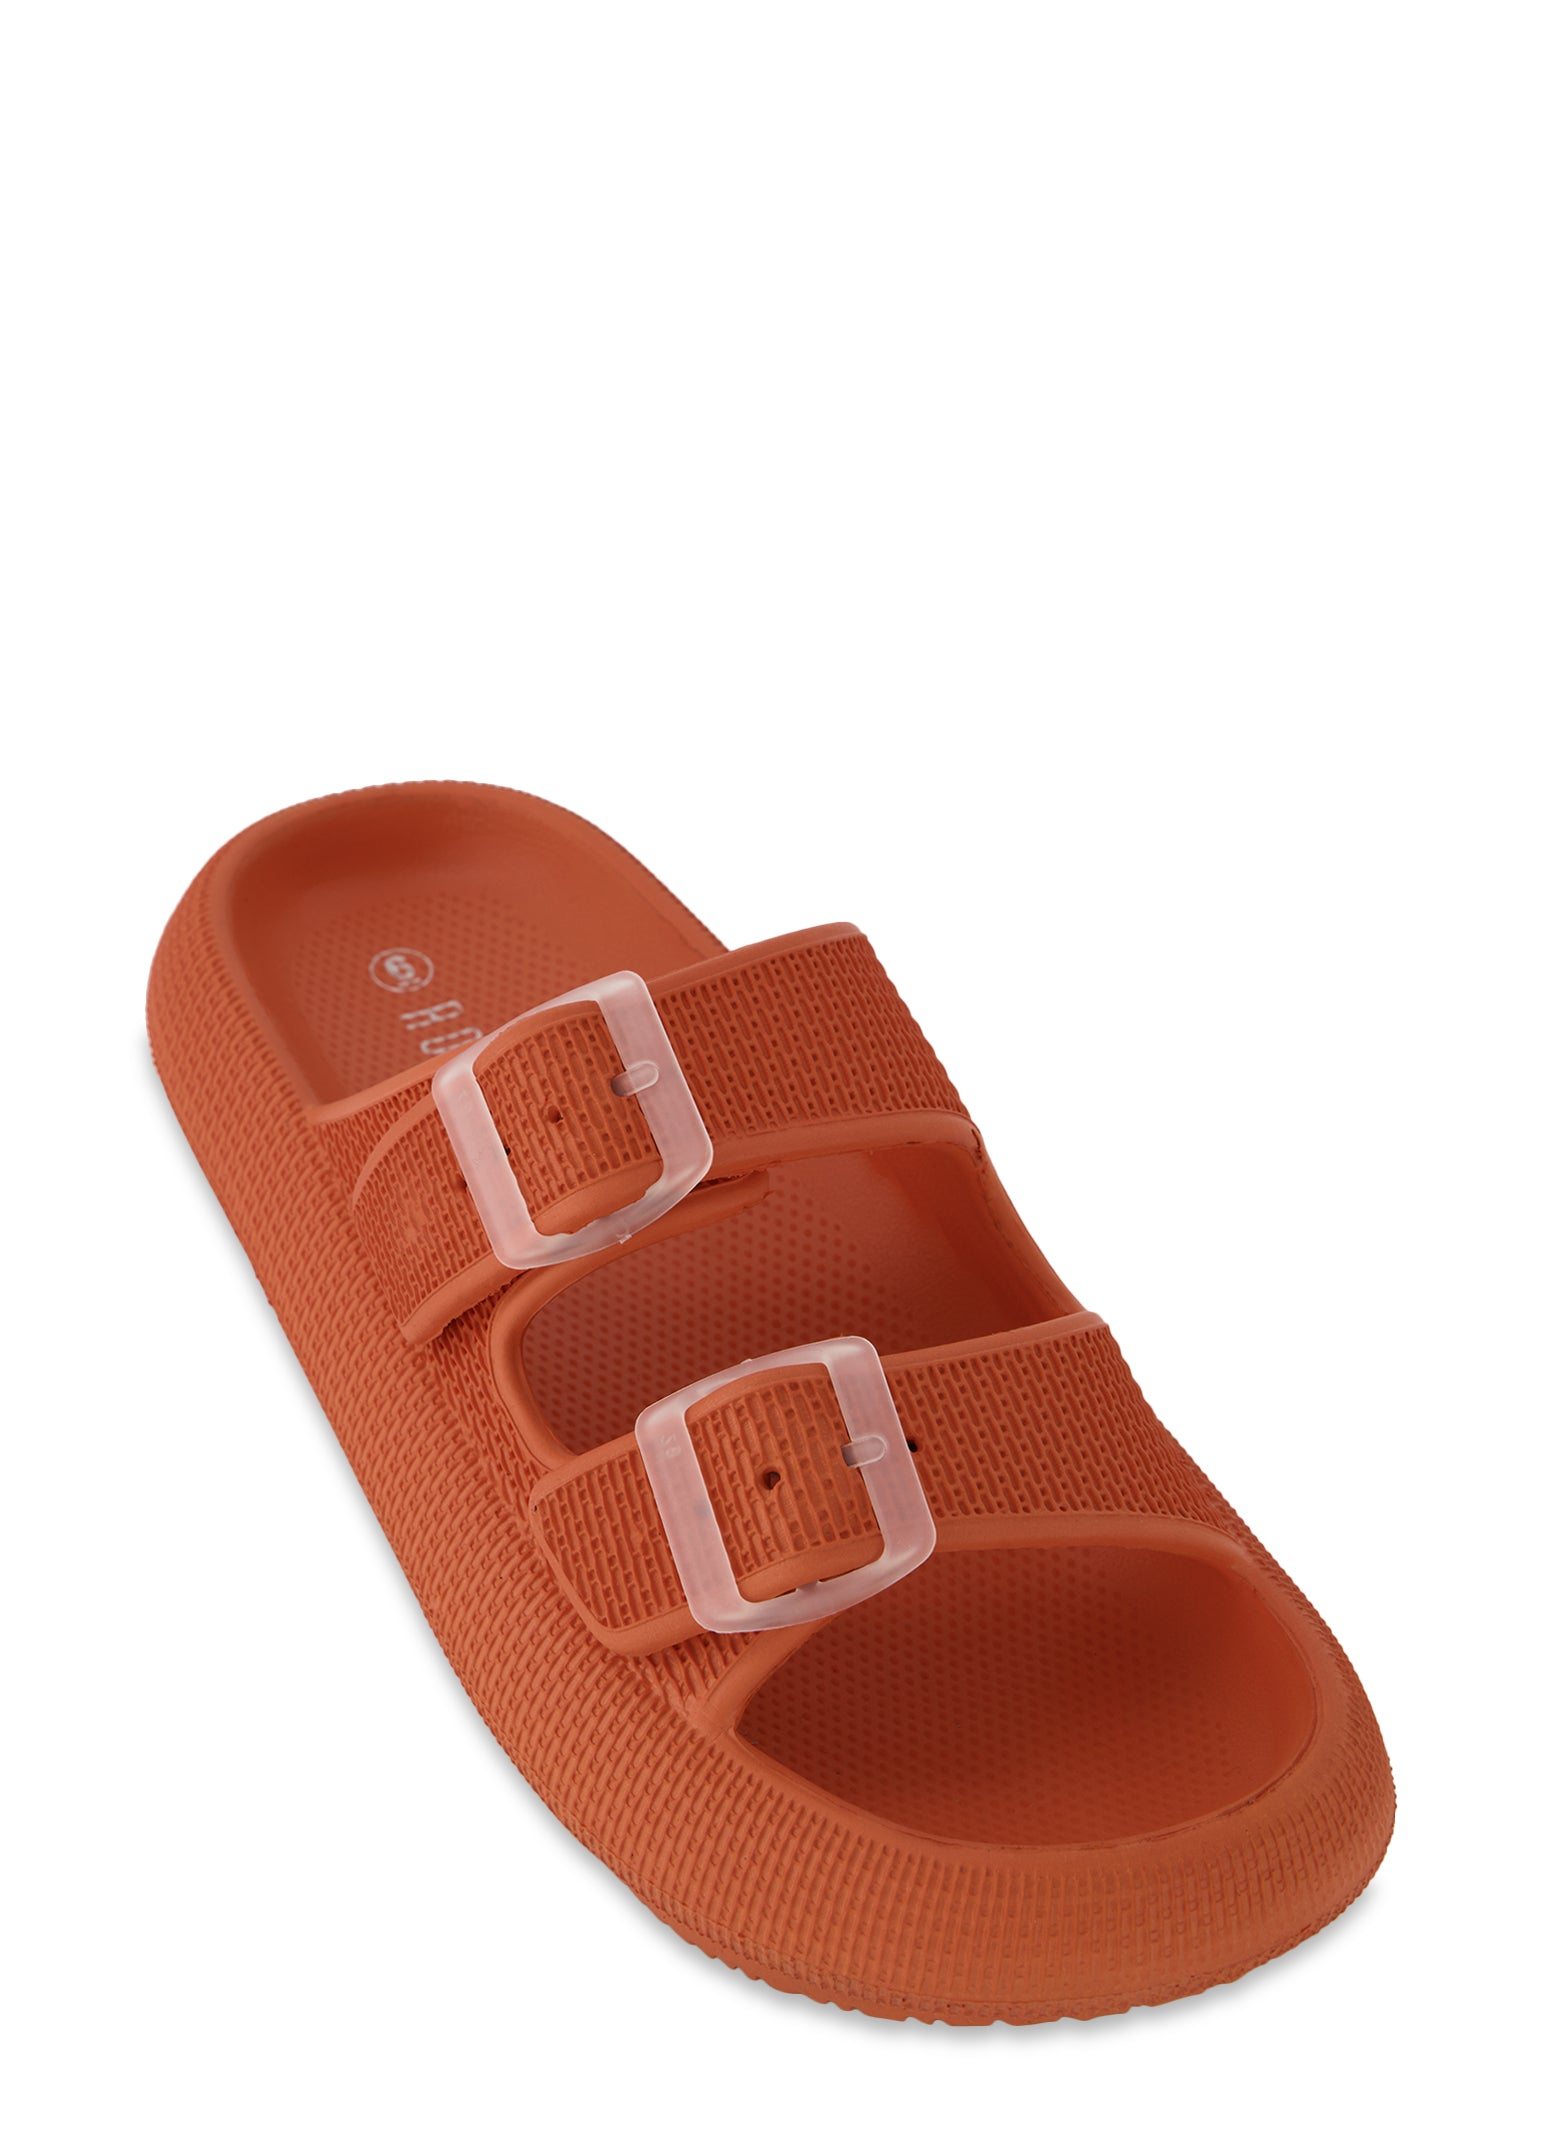 Double Buckled Band Slide Sandals